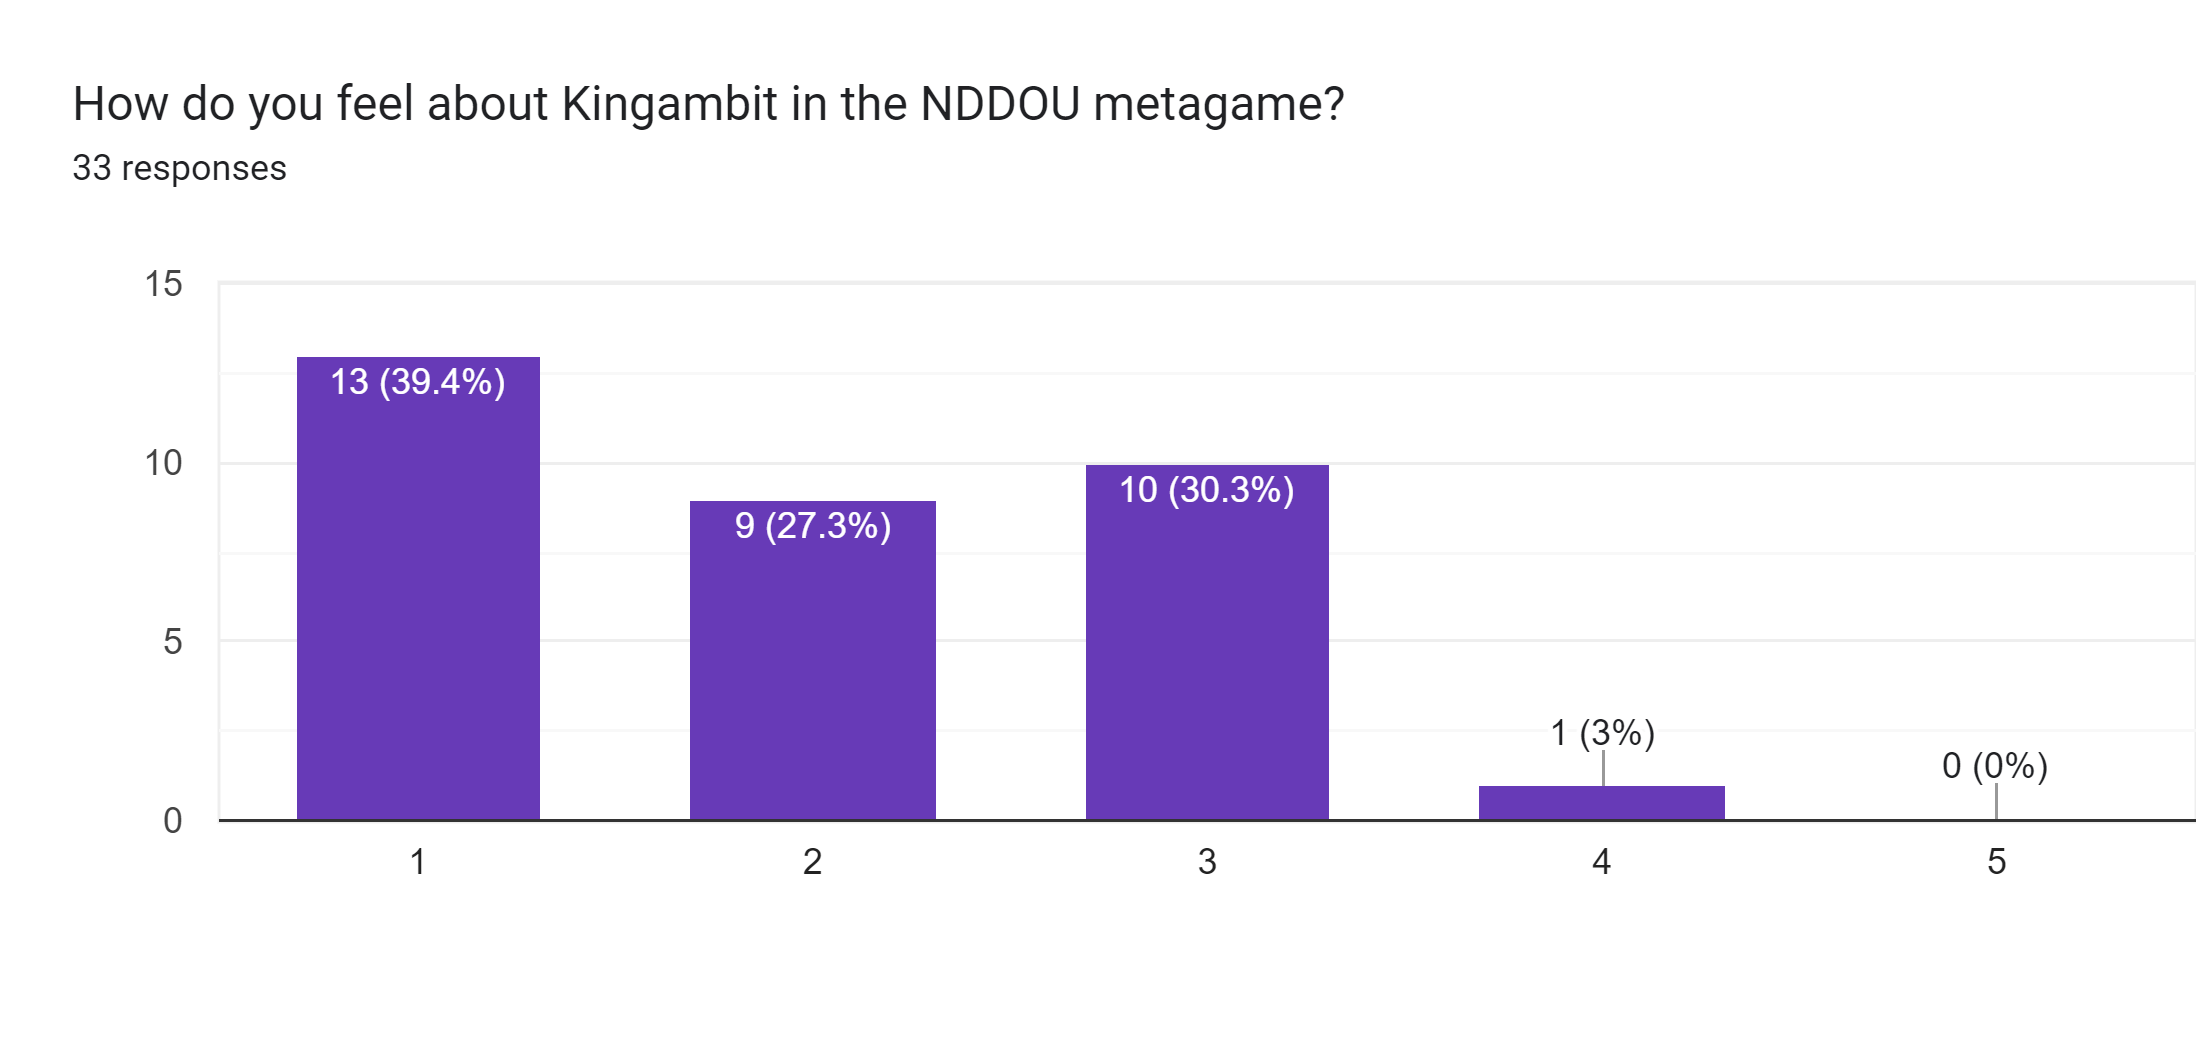 Forms response chart. Question title: How do you feel about Kingambit in the NDDOU metagame?. Number of responses: 33 responses.